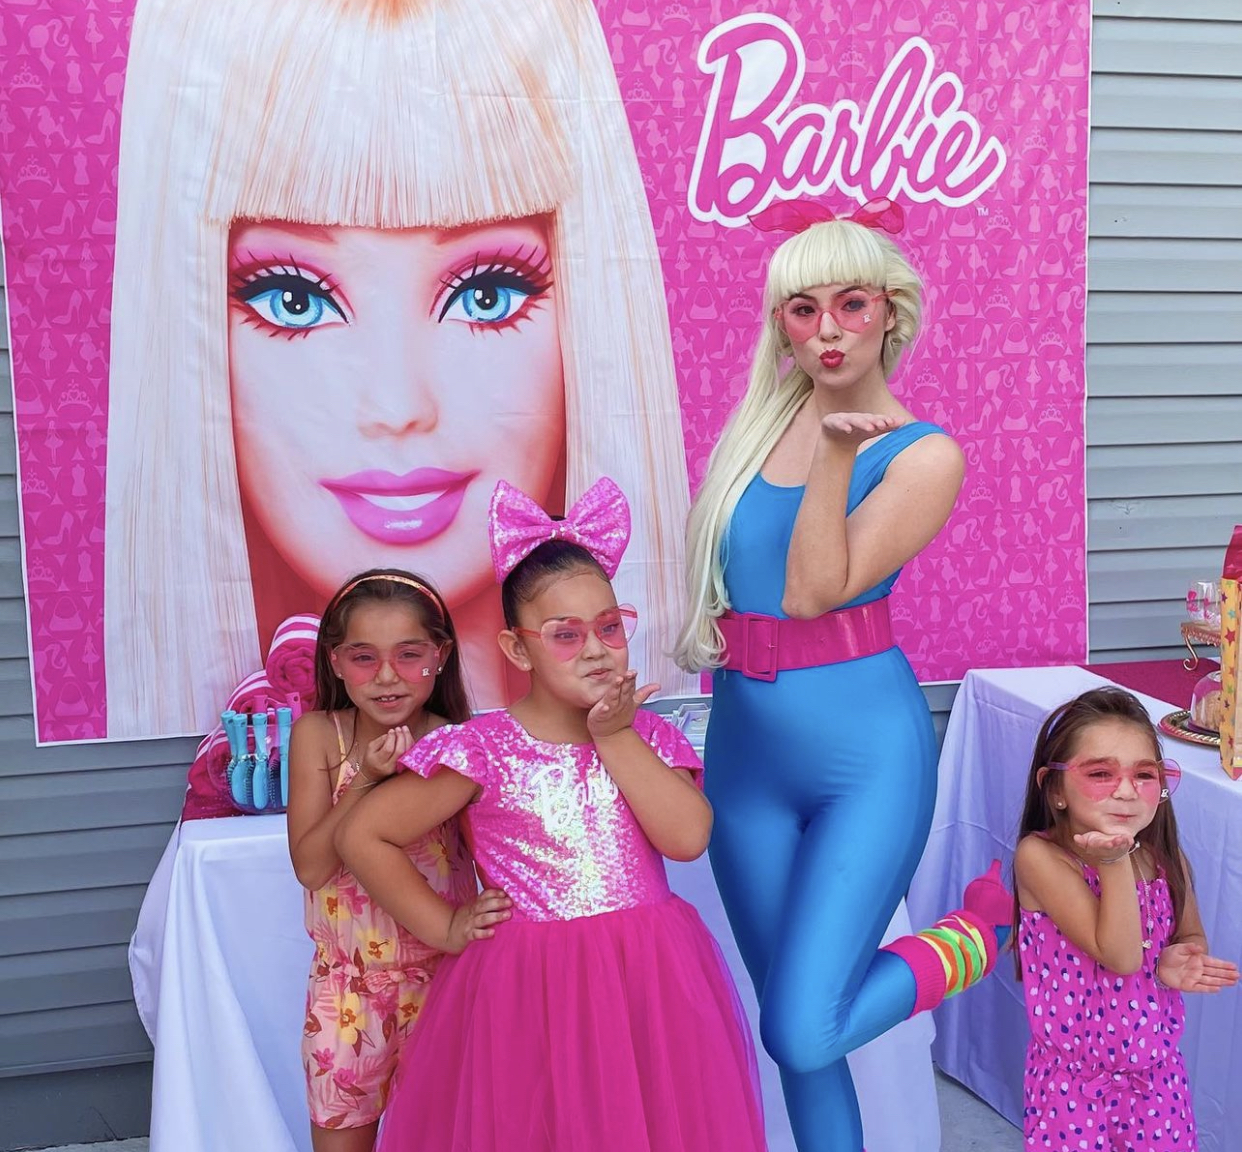 Tampa Barbie Parties from parties with character